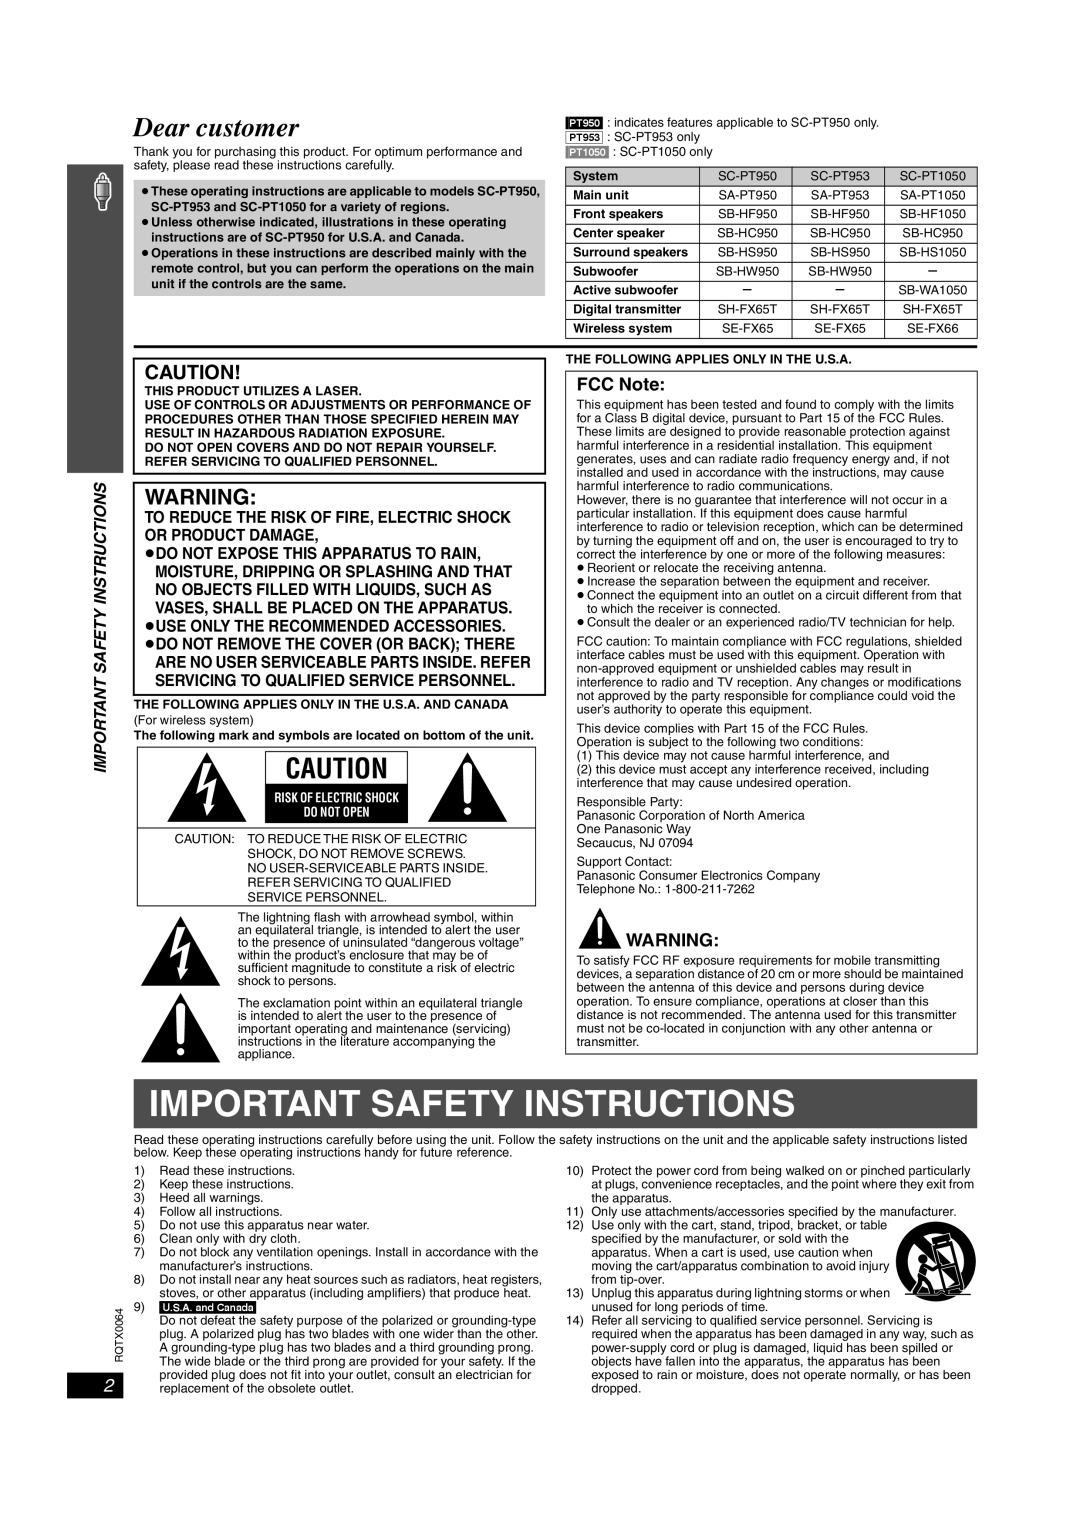 Panasonic SCPT1050, SCPT950, SC-PT953 FCC Note, Important Safety Instructions, ≥Do Not Expose This Apparatus To Rain 